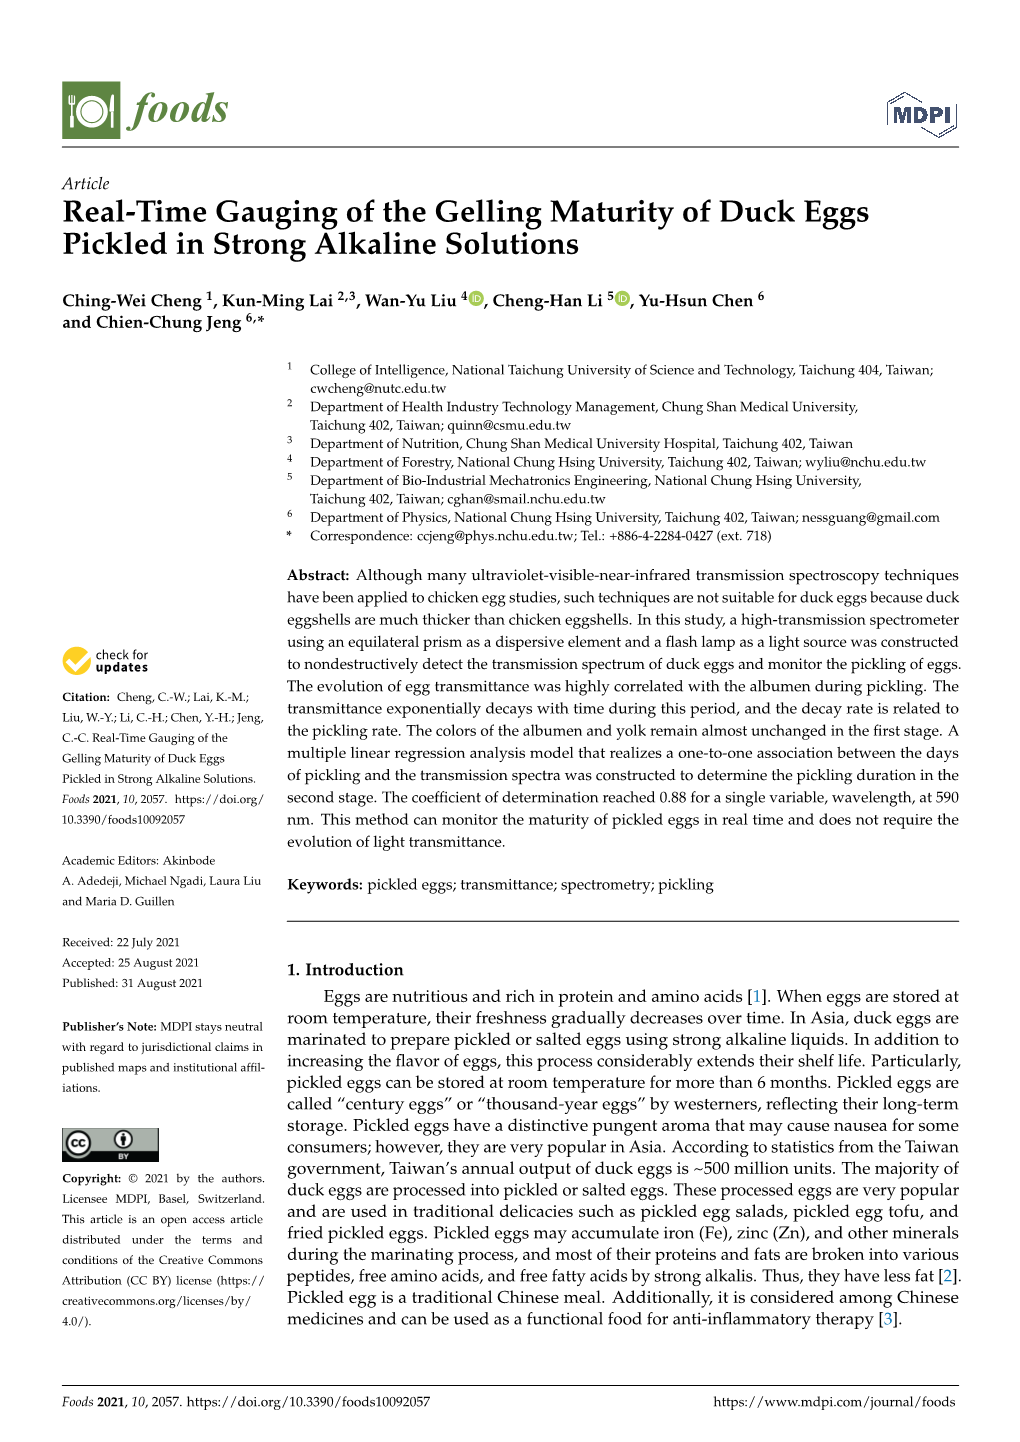 Real-Time Gauging of the Gelling Maturity of Duck Eggs Pickled in Strong Alkaline Solutions